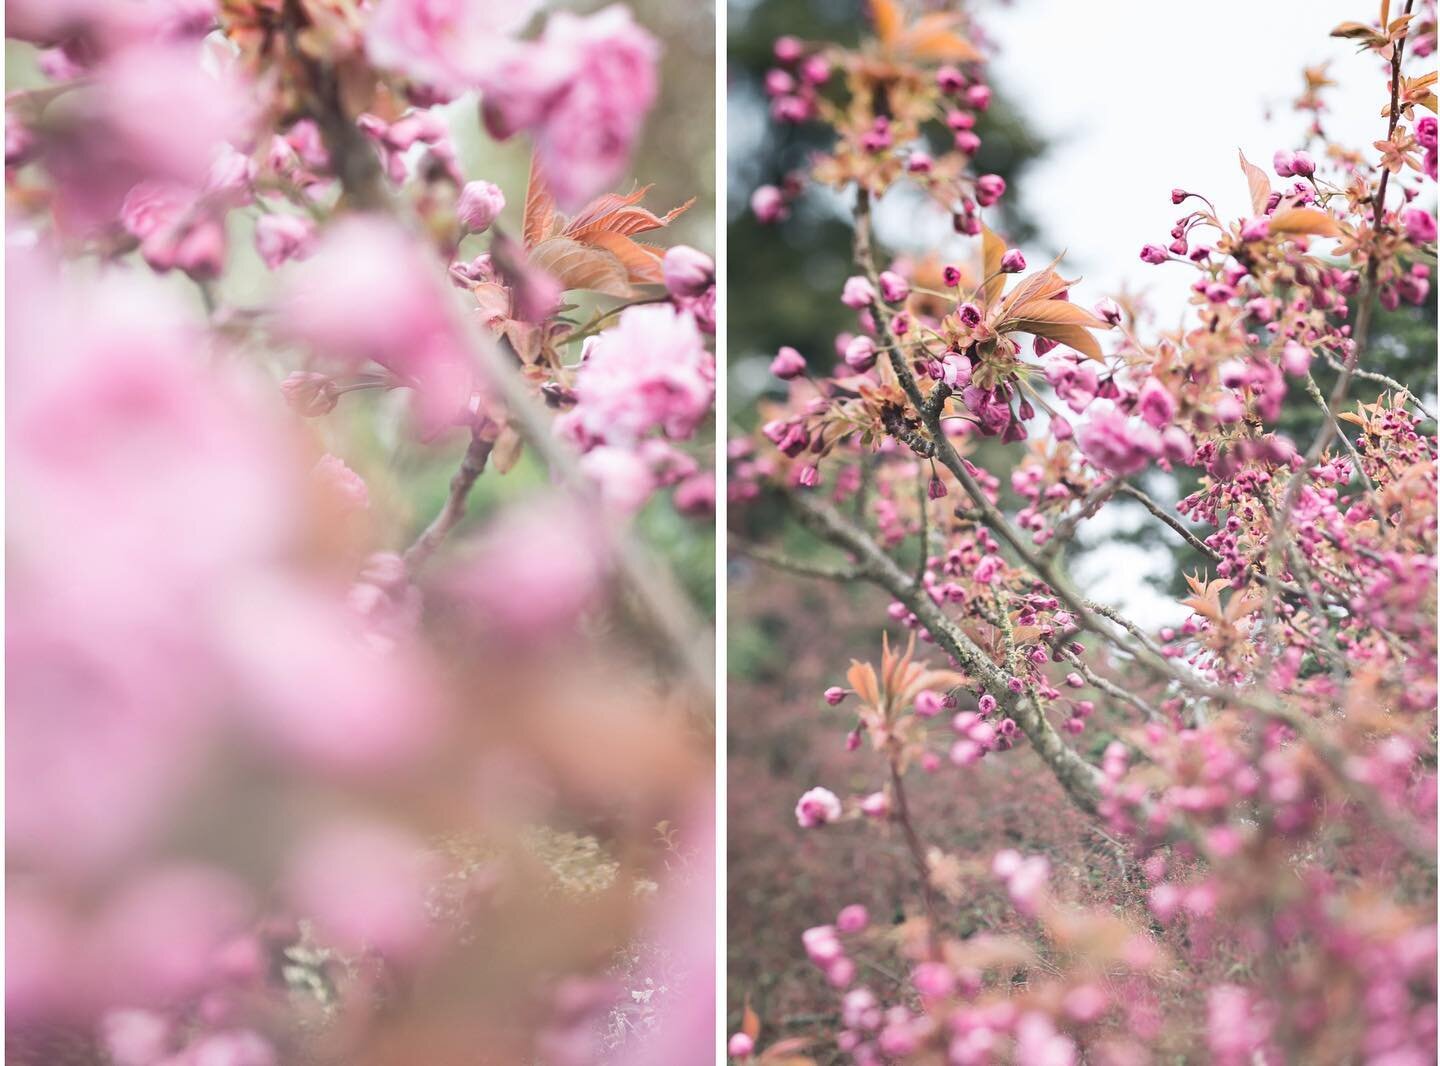 Forced myself outside in near freezing temperatures to capture these blossoms before they disappear. I might not regain feeling in my hands, but I think it was worth it. ⁠🥶🌸😂
⁠
There is no &ldquo;right&rdquo; way to make art. The only wrong is in 